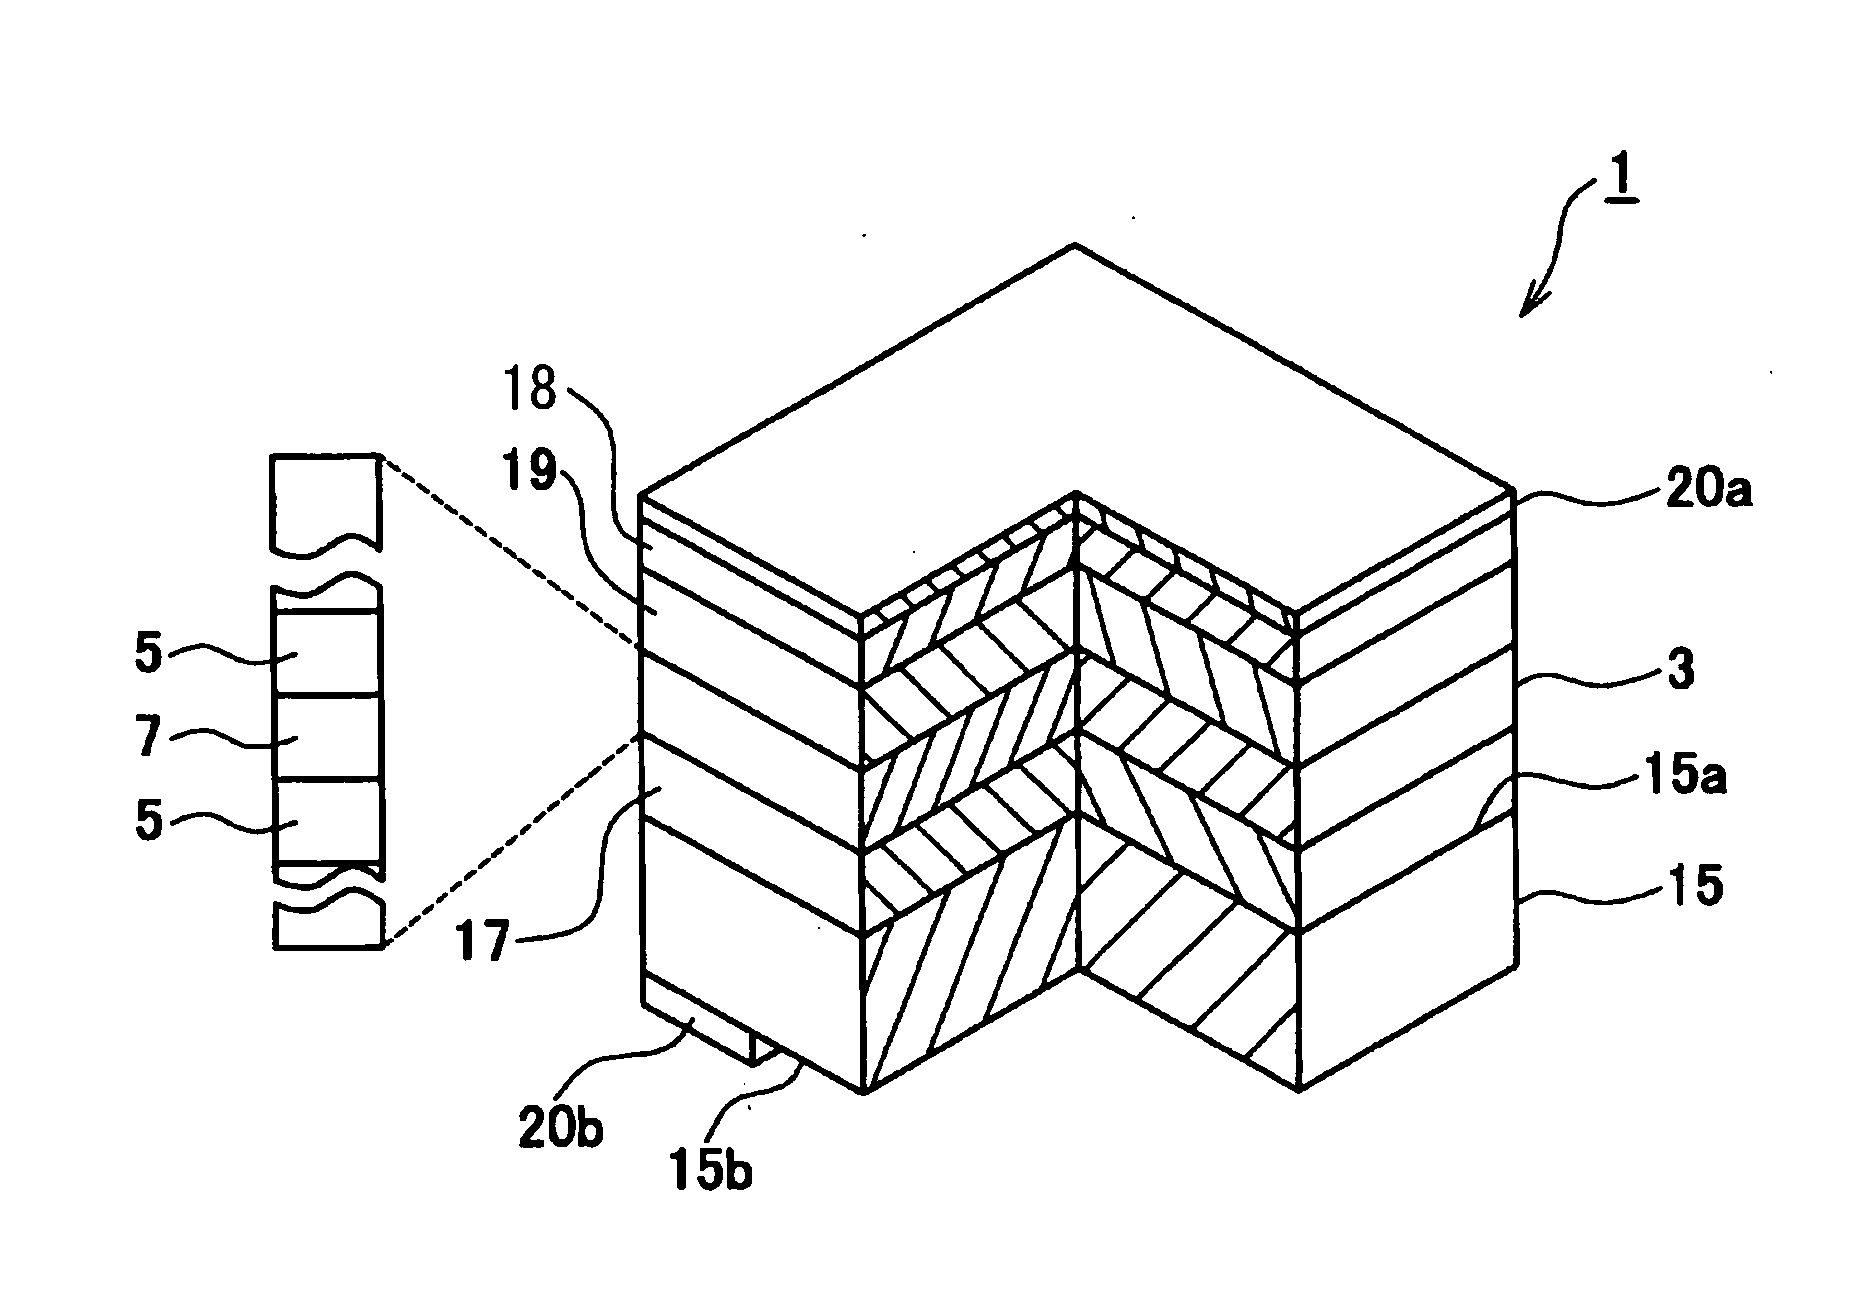 Semiconductor device having quantum well structure, and method of forming the same